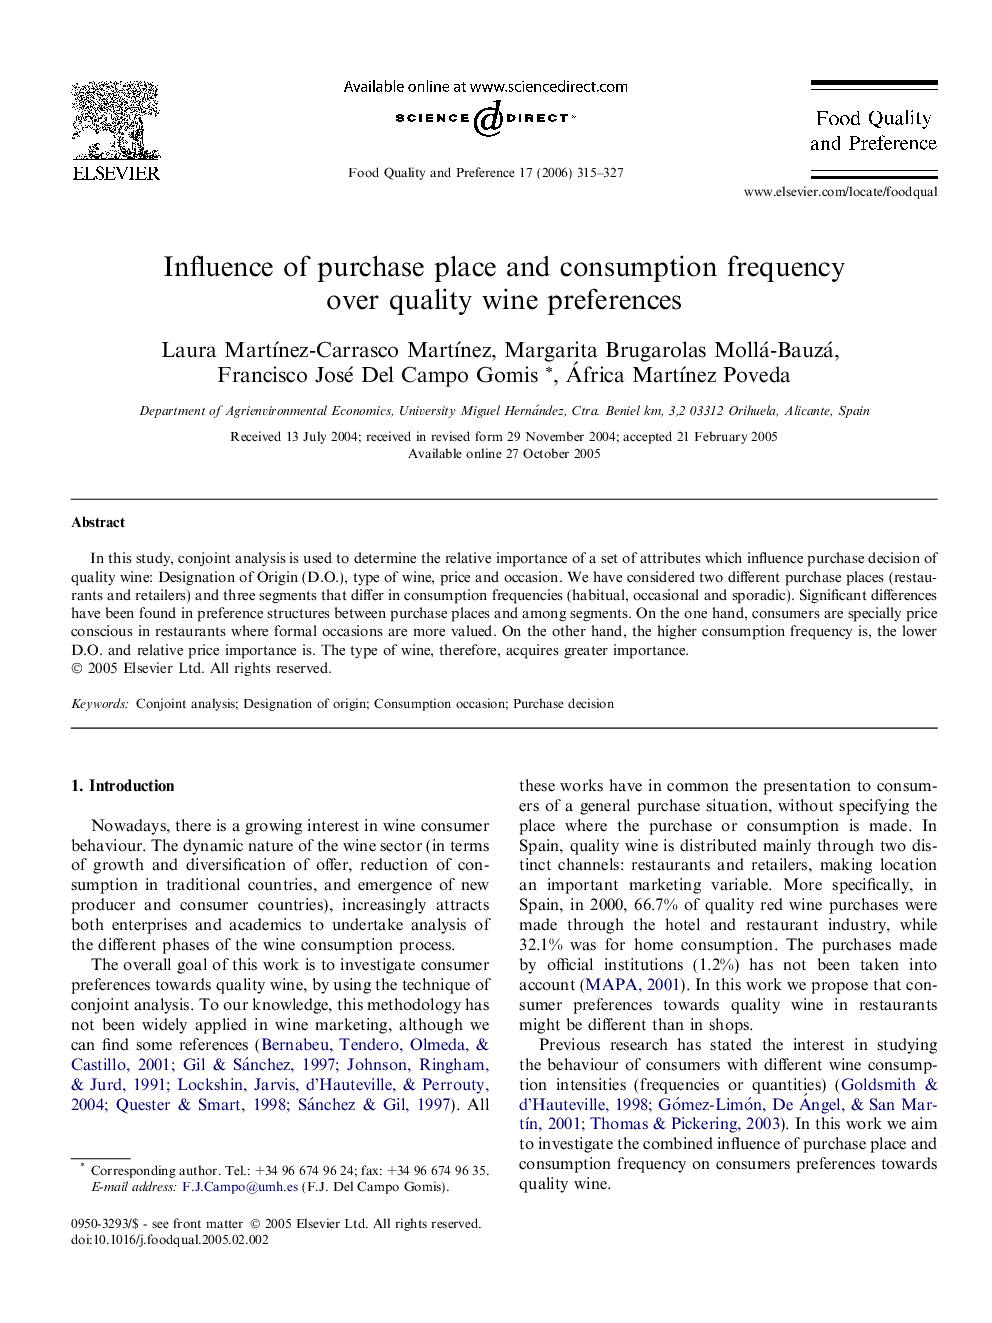 Influence of purchase place and consumption frequency over quality wine preferences